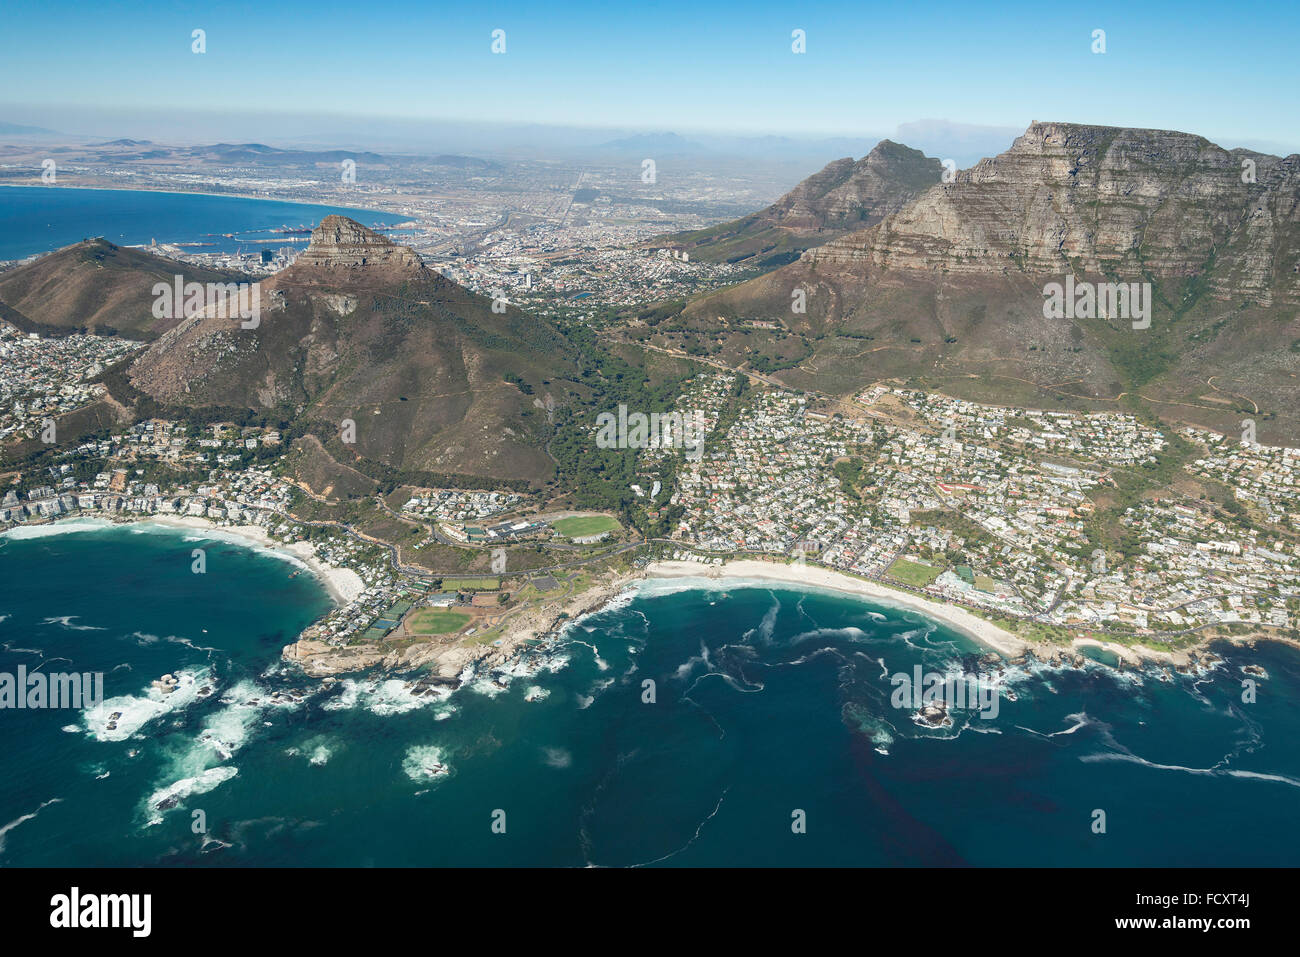 Aerial view of Seapoint and Clifton Bay, Cape Town, Western Cape Province, Republic of South Africa Stock Photo